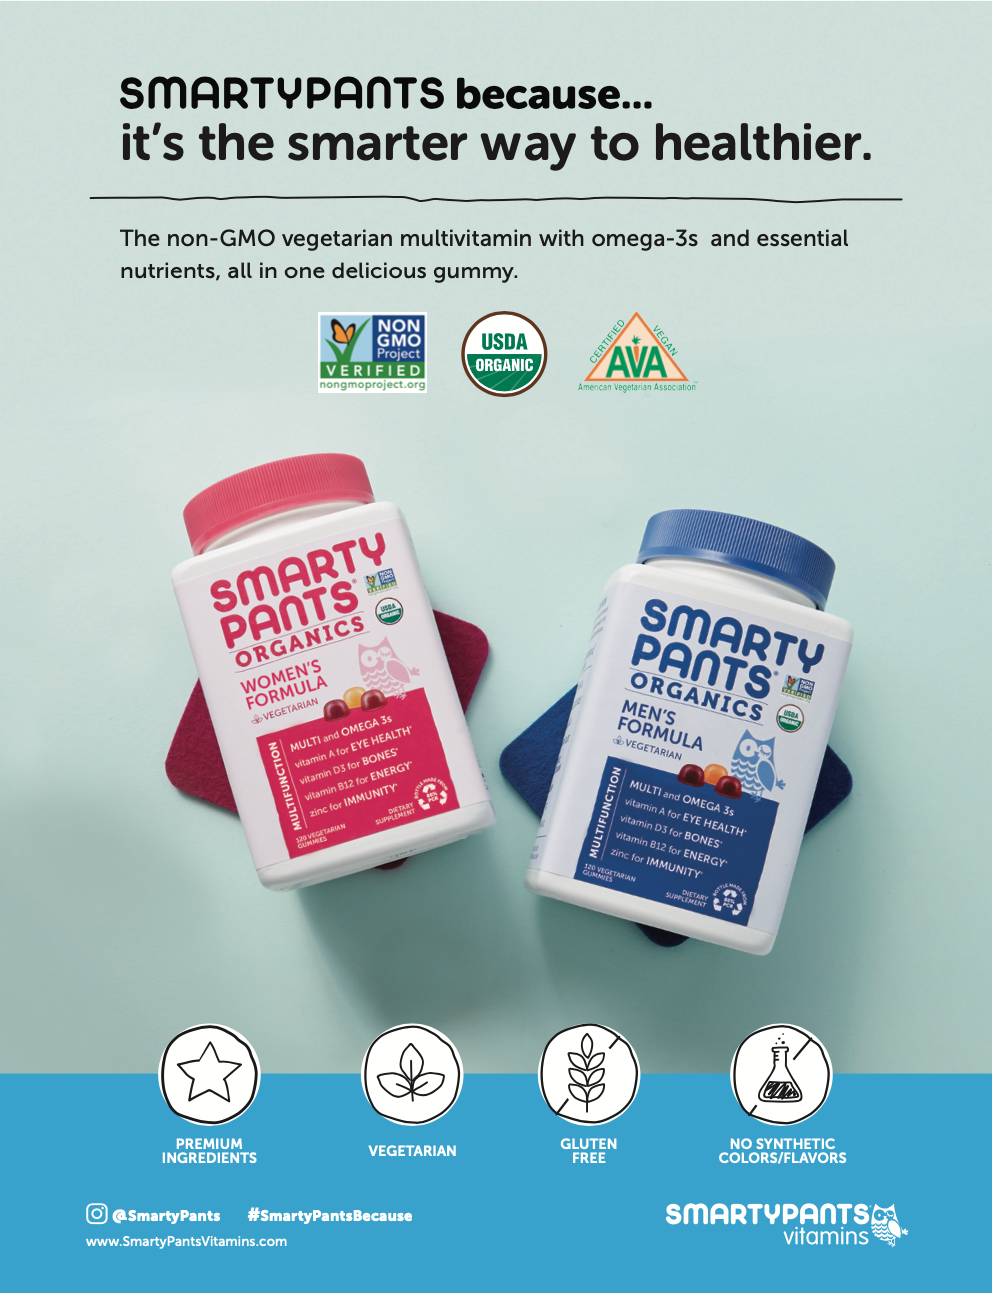 Print Ad for SmartyPants Vitamins